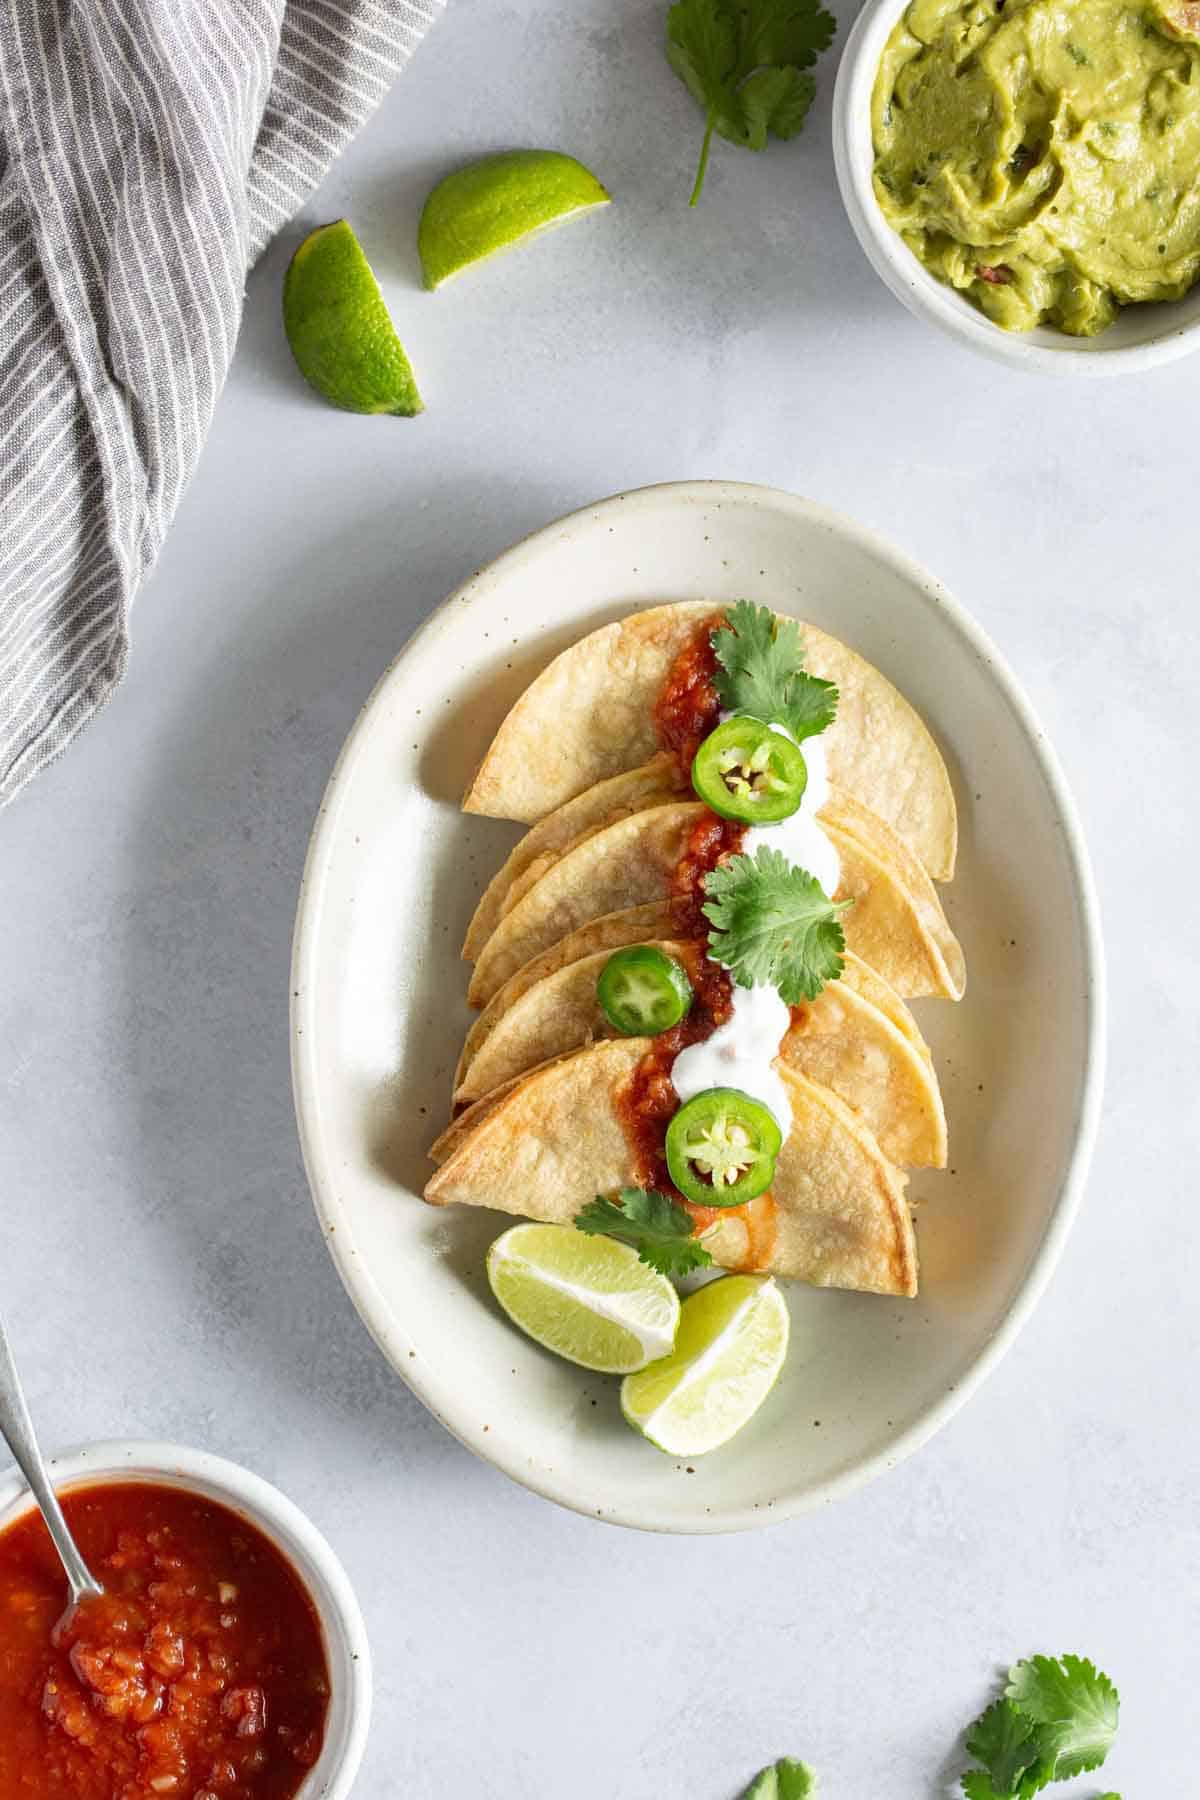 A plate of tacos topped with salsa, sour cream, and sliced jalapeños, garnished with lime wedges. Guacamole, a bowl of salsa, lime wedges, and a striped cloth are placed around the plate.